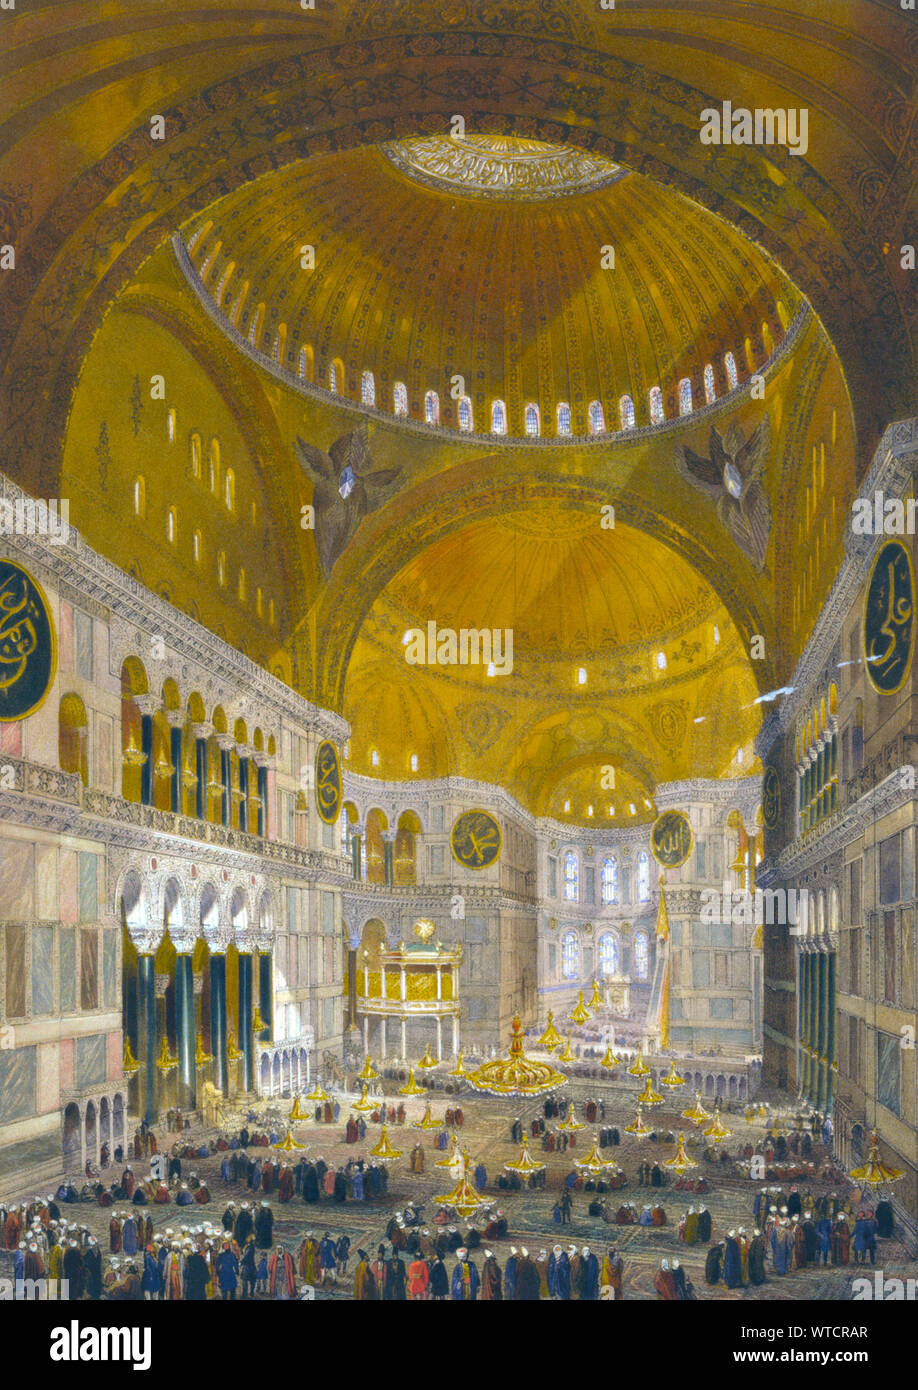 Nave of Ayasofya Mosque, formerly the Church of Hagia Sophia, facing east; with groups of men in traditional dress. Turkey (Ottoman Empire). Stock Photo